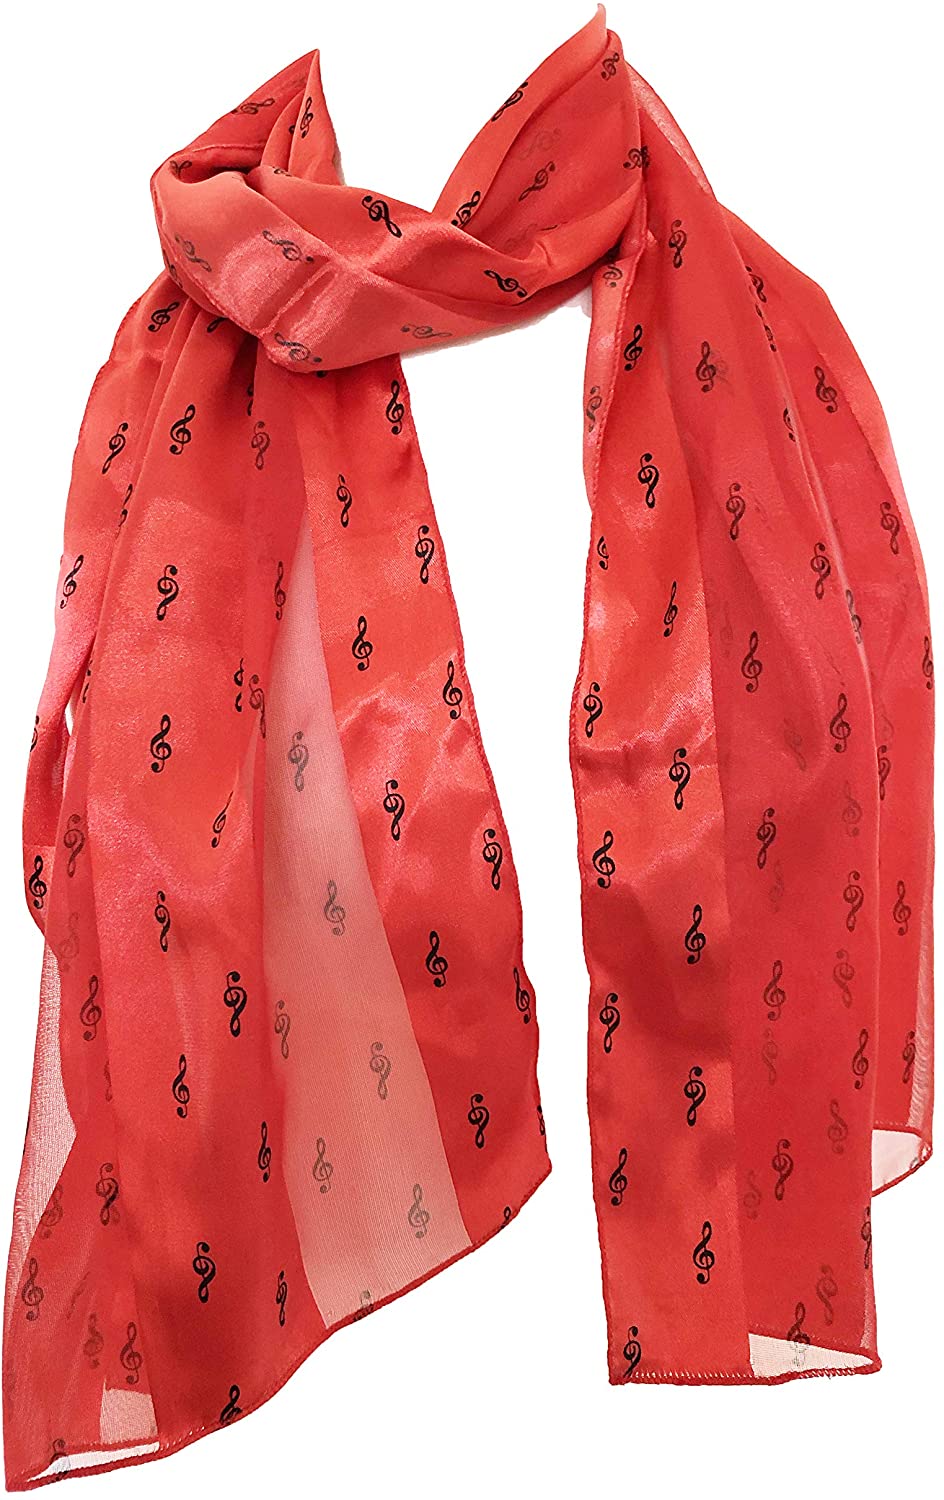 Pamper Yourself Now Red Treble Clef Striped Music Shiny Thin Pretty Scarf